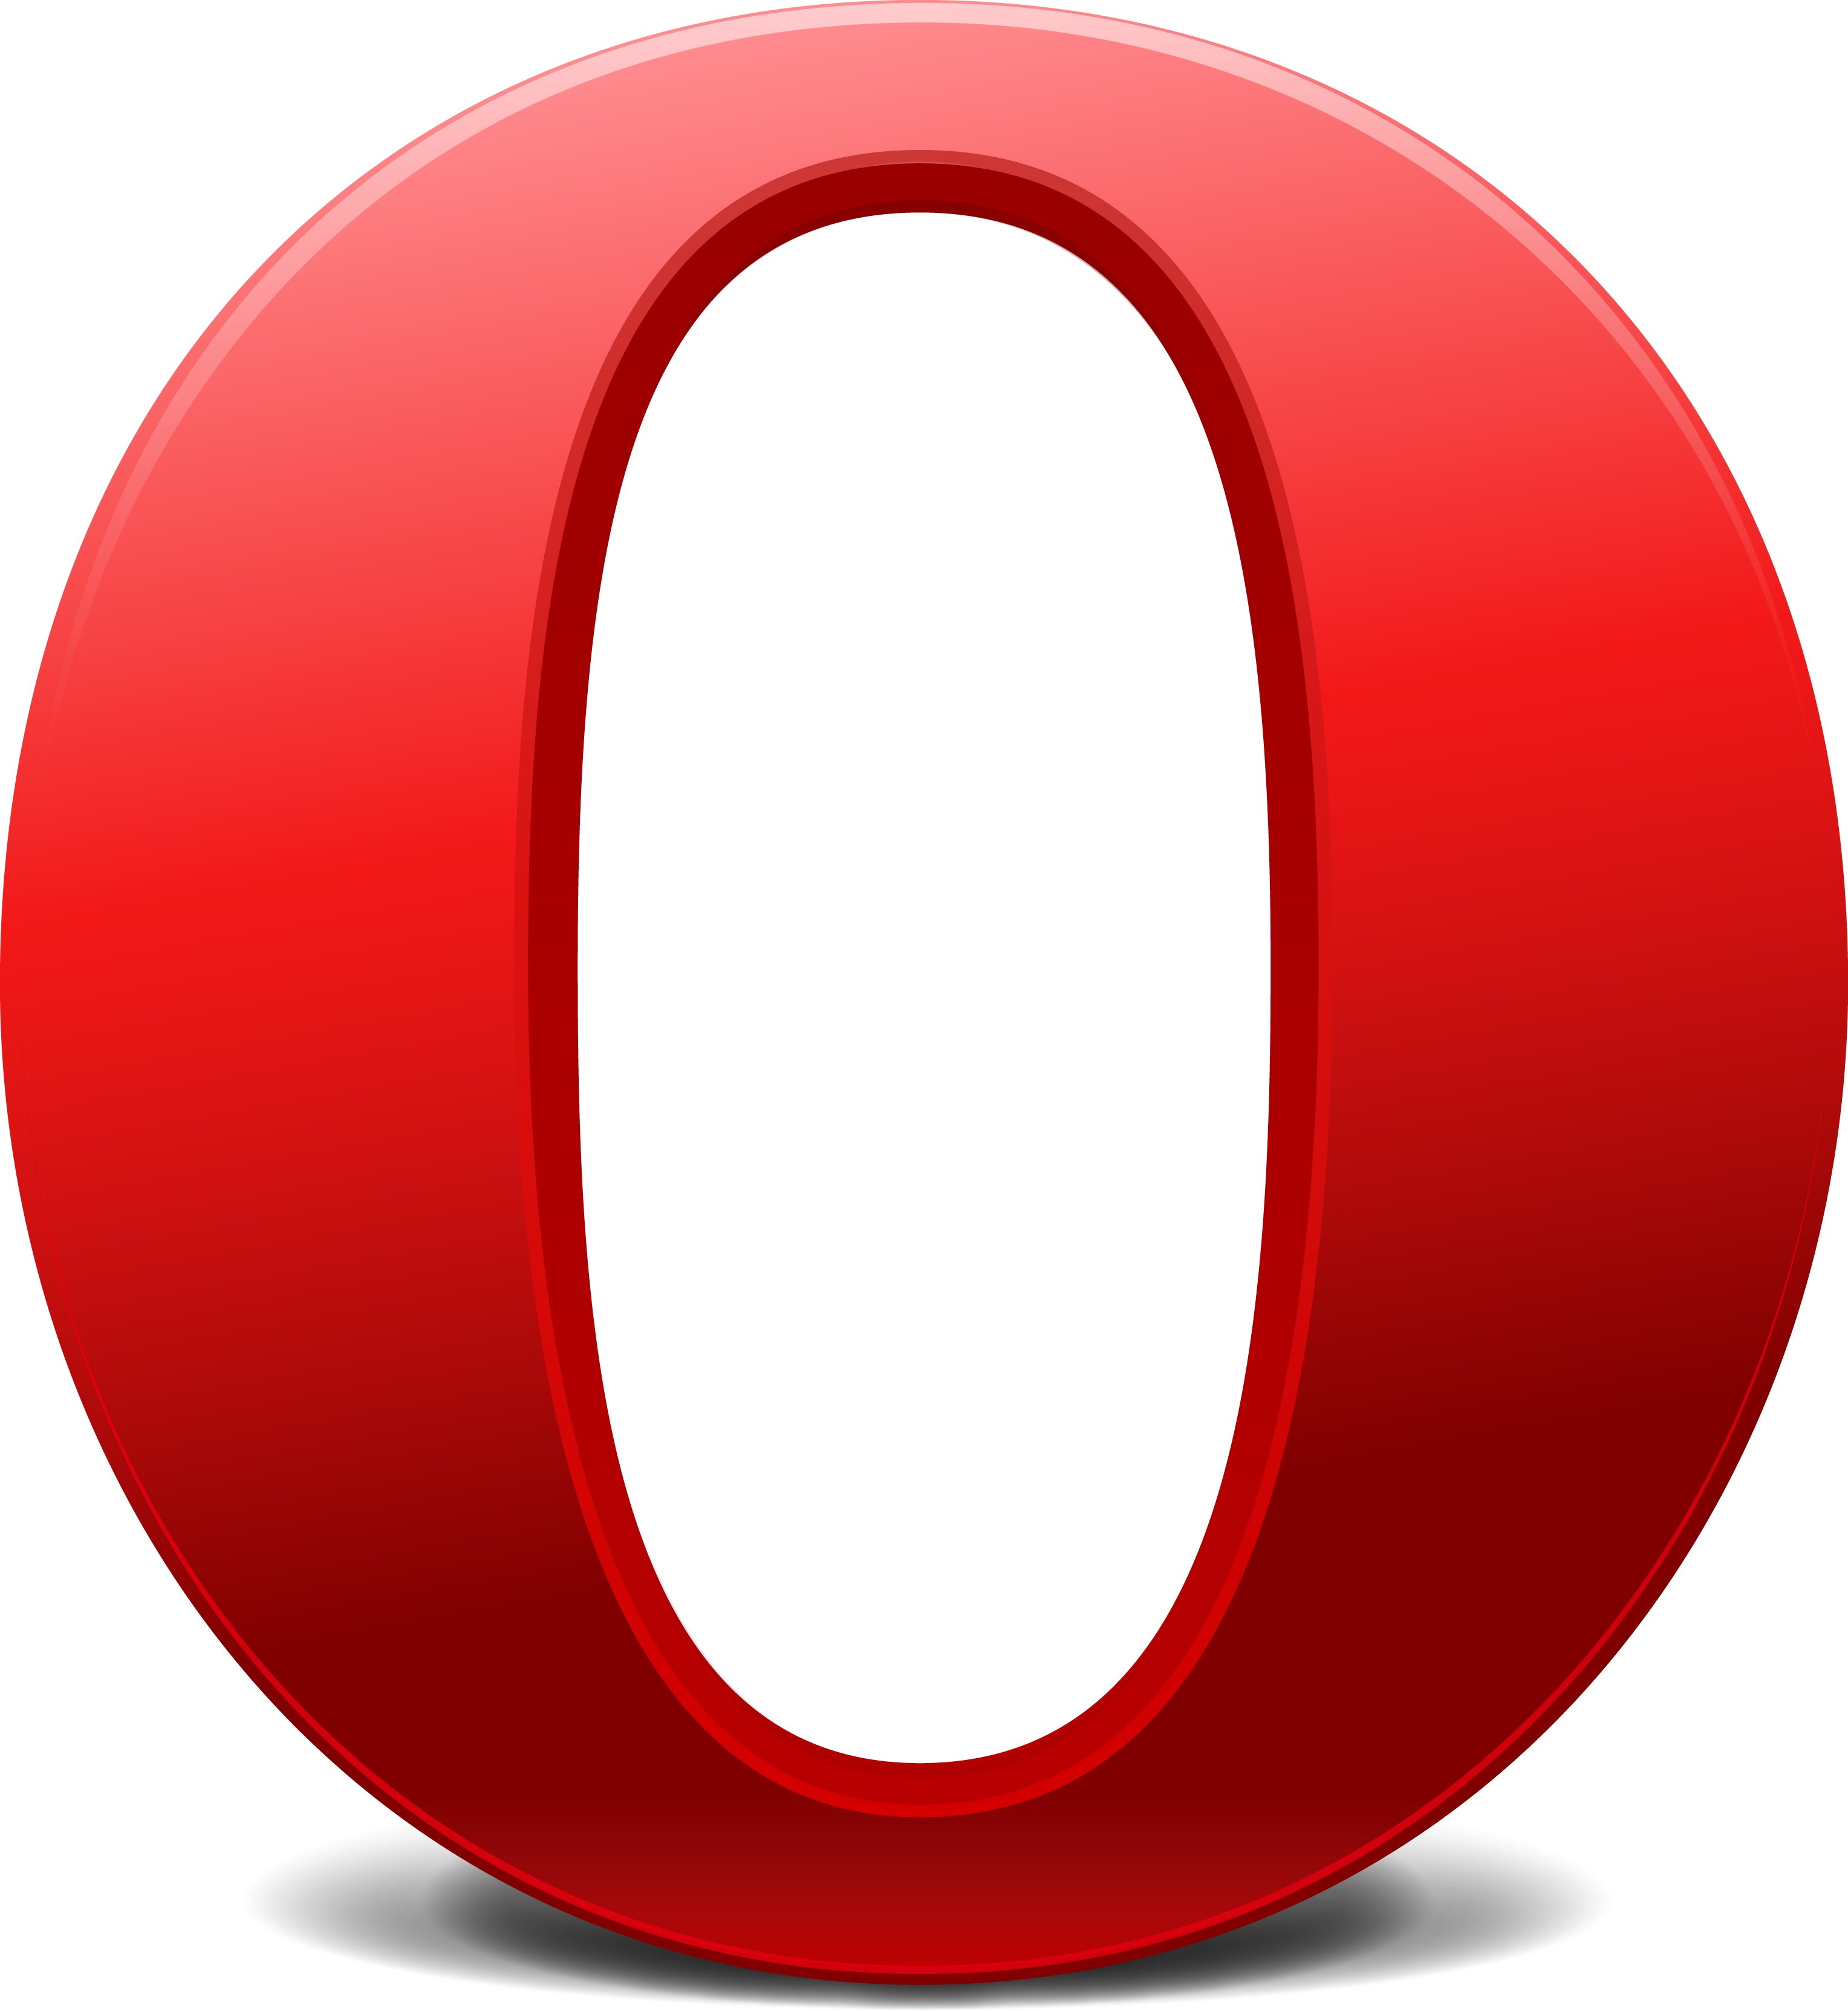 opera browser download for pc free